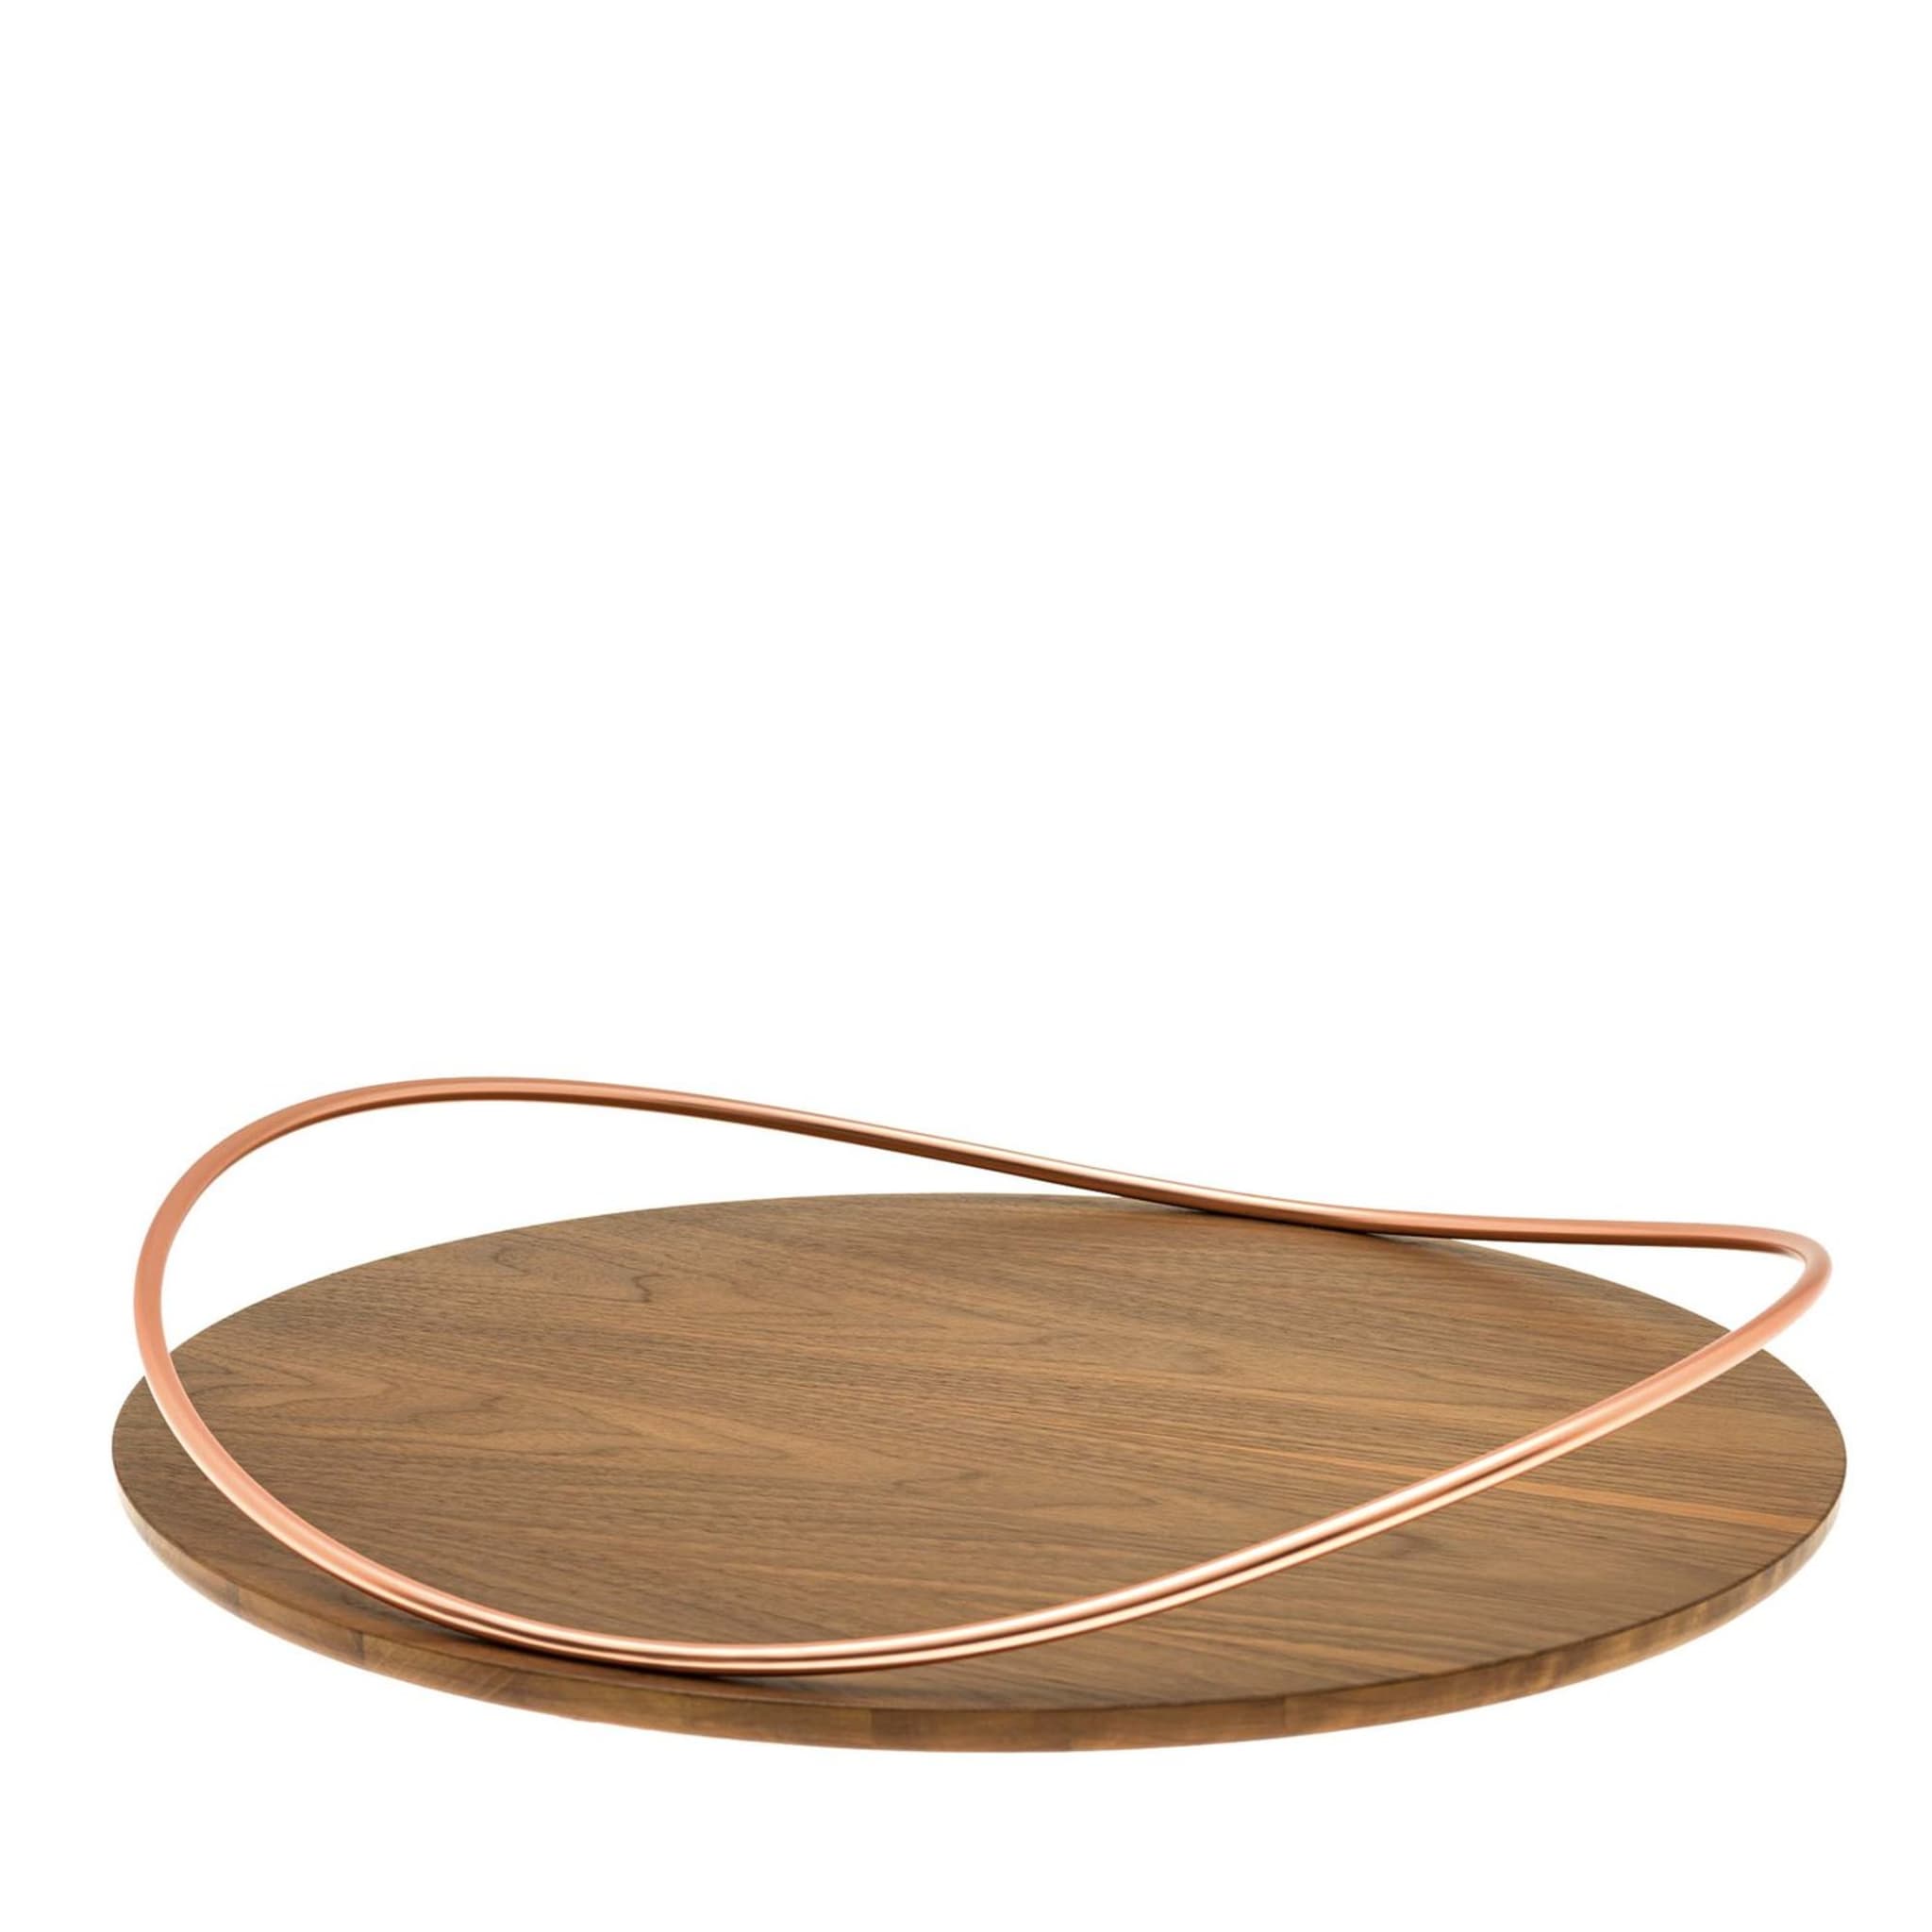 Touchè walnut wood serving tray - Main view